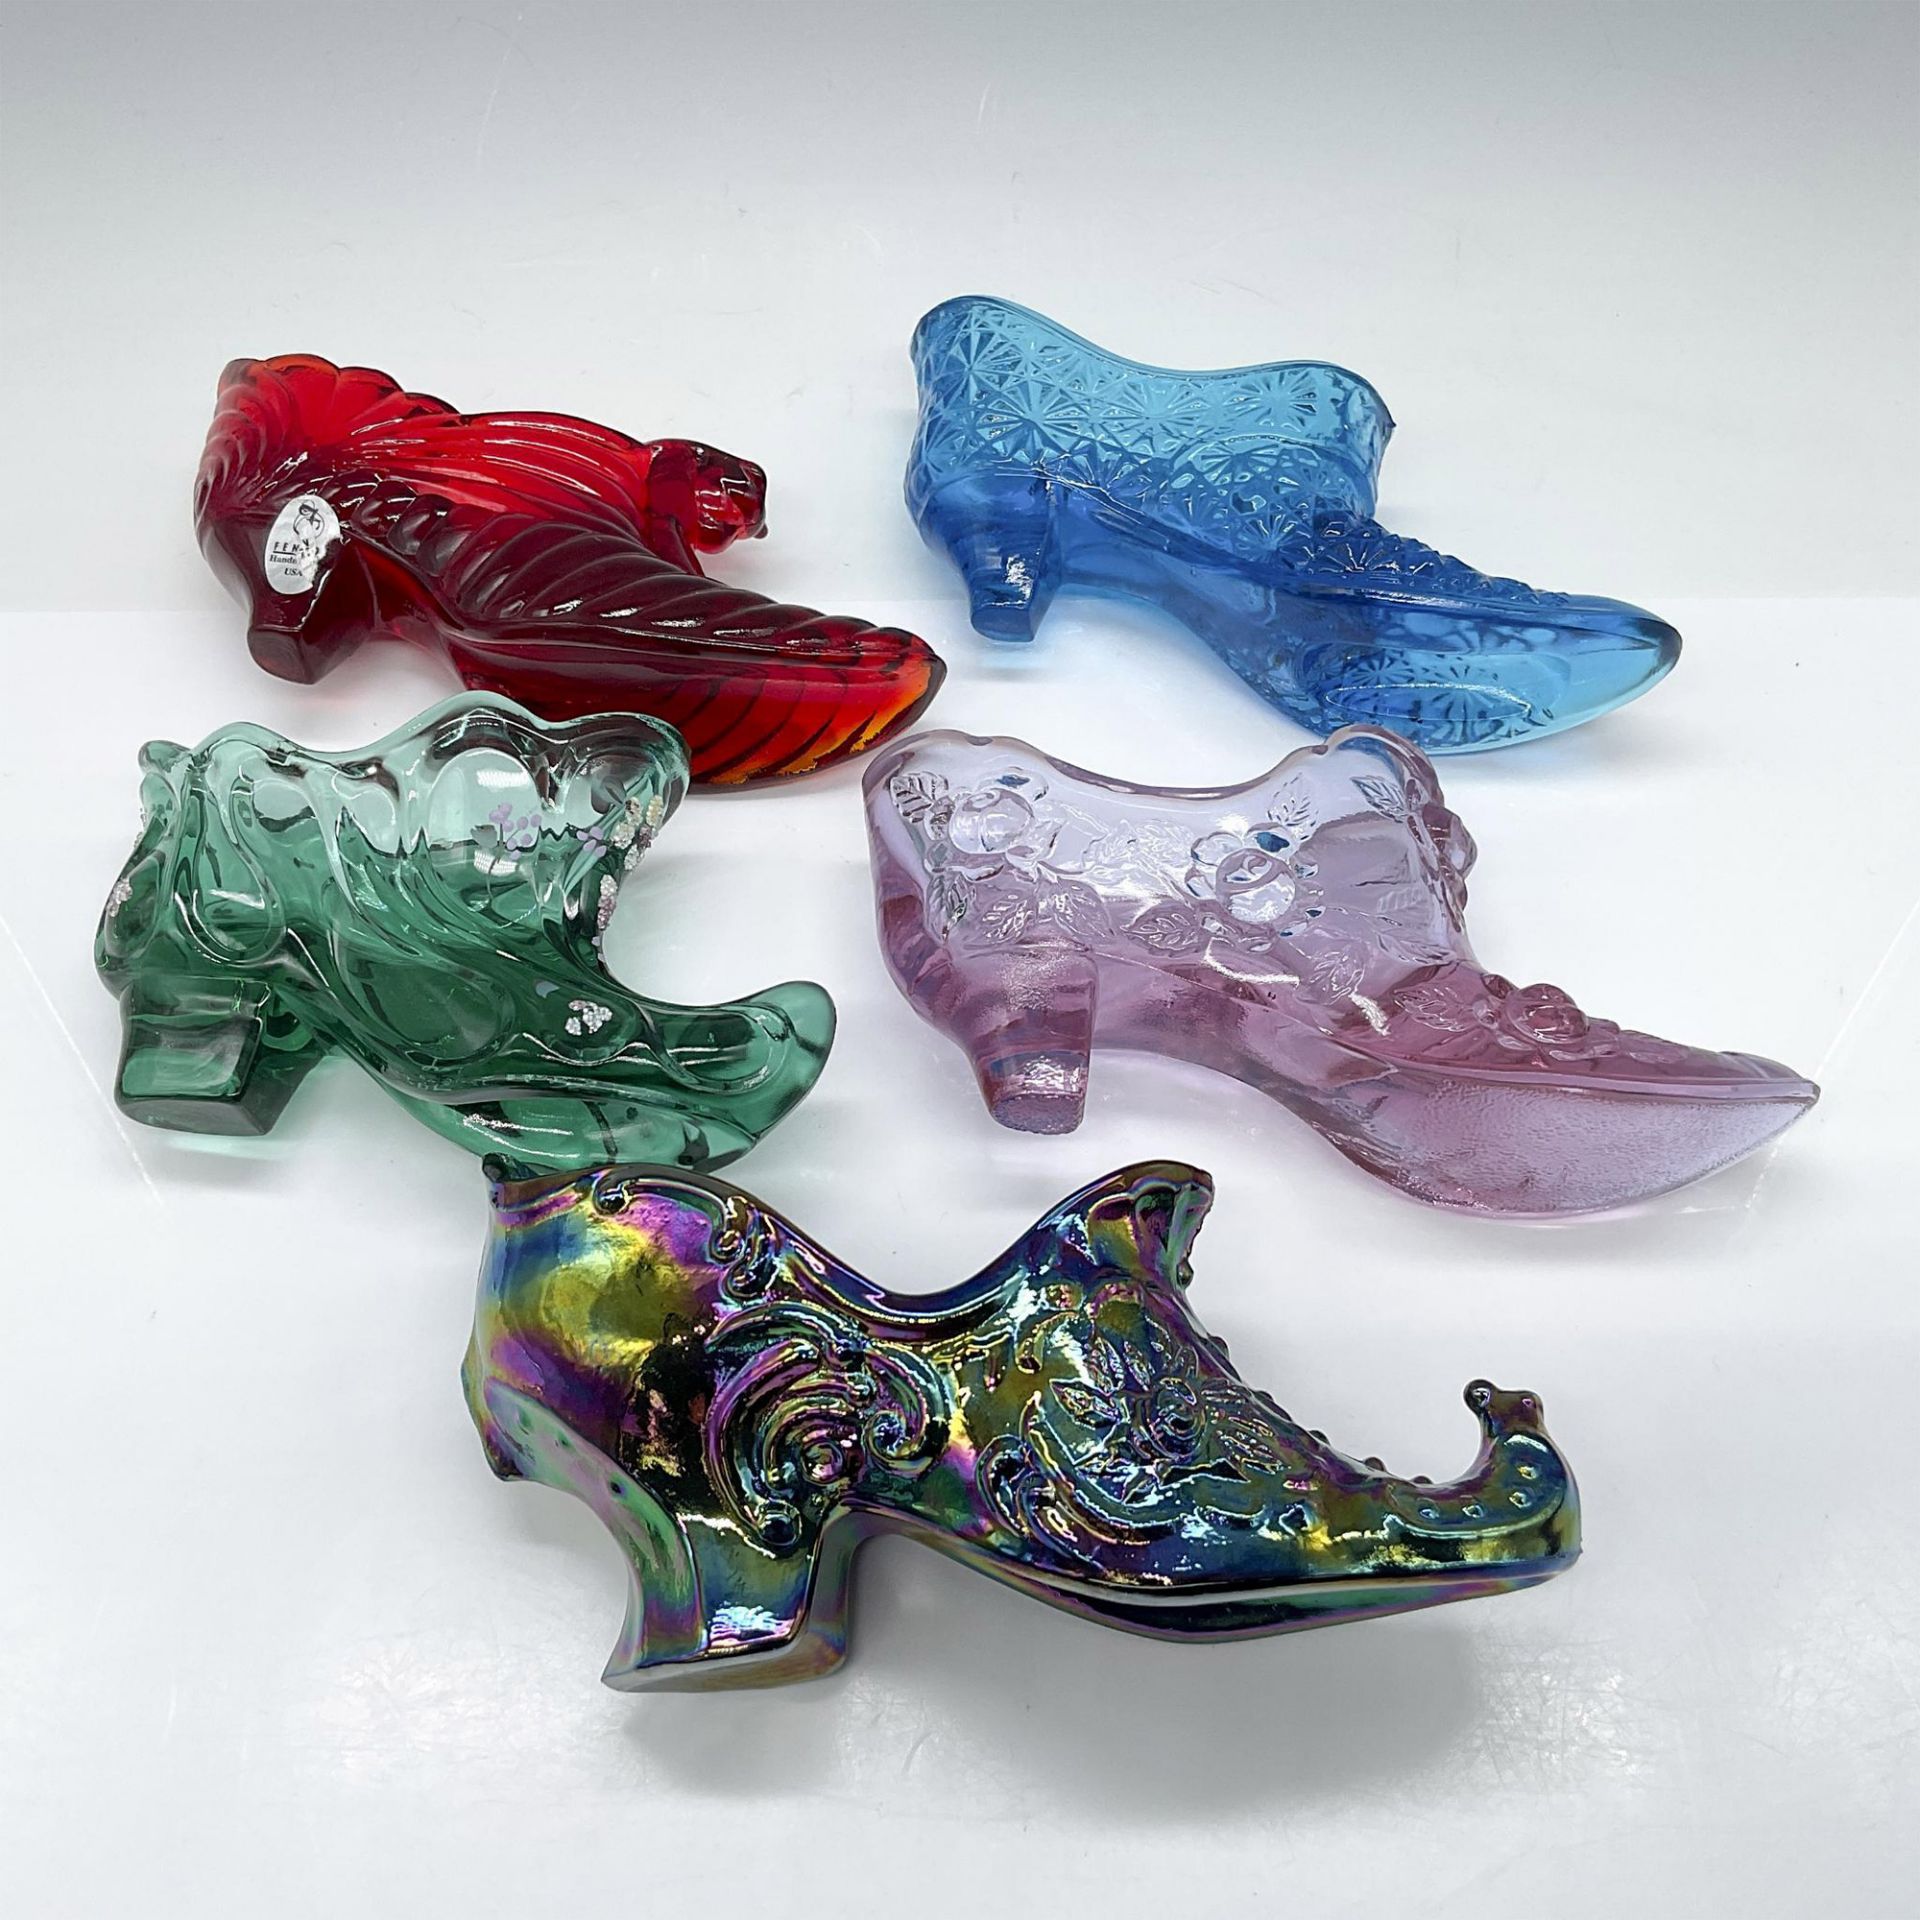 5pc Vintage Color Glass Shoes/Slippers, Fenton and Mosser - Image 4 of 4